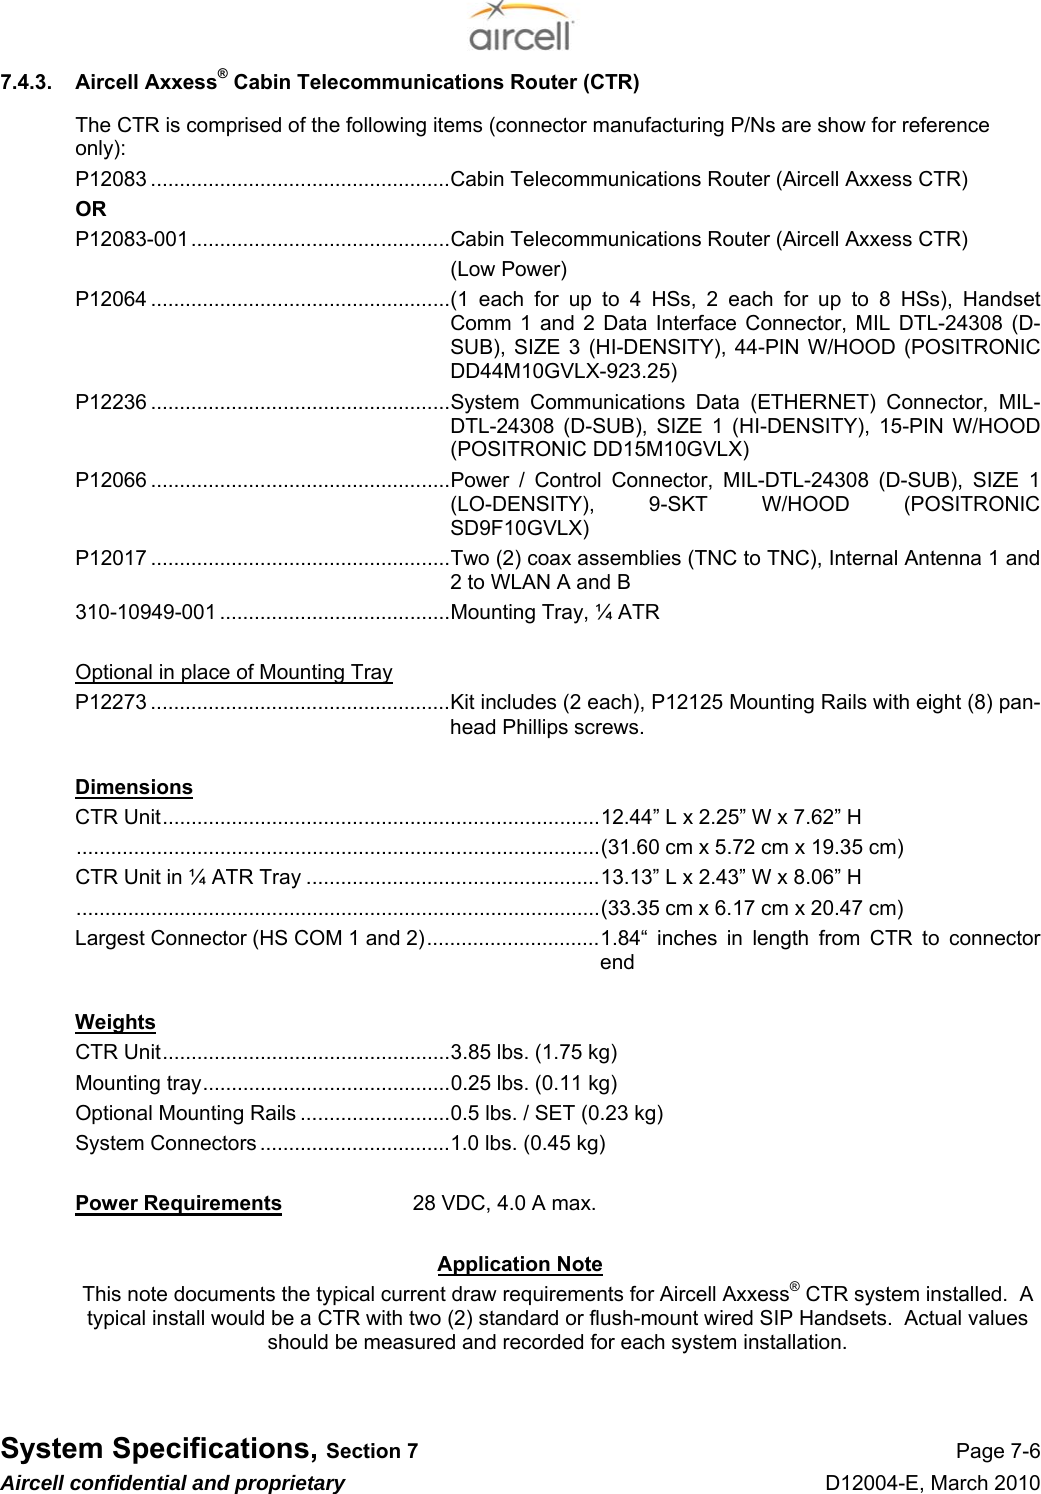  System Specifications, Section 7 Page 7-6 Aircell confidential and proprietary D12004-E, March 2010 7.4.3.  Aircell Axxess® Cabin Telecommunications Router (CTR) The CTR is comprised of the following items (connector manufacturing P/Ns are show for reference only): P12083 ....................................................Cabin Telecommunications Router (Aircell Axxess CTR) OR P12083-001.............................................Cabin Telecommunications Router (Aircell Axxess CTR) (Low Power) P12064 ....................................................(1 each for up to 4 HSs, 2 each for up to 8 HSs), Handset Comm 1 and 2 Data Interface Connector, MIL DTL-24308 (D-SUB), SIZE 3 (HI-DENSITY), 44-PIN W/HOOD (POSITRONIC DD44M10GVLX-923.25) P12236 ....................................................System Communications Data (ETHERNET) Connector, MIL-DTL-24308 (D-SUB), SIZE 1 (HI-DENSITY), 15-PIN W/HOOD (POSITRONIC DD15M10GVLX) P12066 ....................................................Power / Control Connector, MIL-DTL-24308 (D-SUB), SIZE 1 (LO-DENSITY), 9-SKT W/HOOD (POSITRONIC SD9F10GVLX) P12017 ....................................................Two (2) coax assemblies (TNC to TNC), Internal Antenna 1 and 2 to WLAN A and B 310-10949-001 ........................................Mounting Tray, ¼ ATR  Optional in place of Mounting Tray P12273 ....................................................Kit includes (2 each), P12125 Mounting Rails with eight (8) pan-head Phillips screws.  Dimensions CTR Unit............................................................................12.44” L x 2.25” W x 7.62” H ...........................................................................................(31.60 cm x 5.72 cm x 19.35 cm) CTR Unit in ¼ ATR Tray ...................................................13.13” L x 2.43” W x 8.06” H ...........................................................................................(33.35 cm x 6.17 cm x 20.47 cm) Largest Connector (HS COM 1 and 2)..............................1.84“  inches in length from CTR to connector end  Weights CTR Unit..................................................3.85 lbs. (1.75 kg) Mounting tray...........................................0.25 lbs. (0.11 kg) Optional Mounting Rails ..........................0.5 lbs. / SET (0.23 kg) System Connectors .................................1.0 lbs. (0.45 kg)  Power Requirements  28 VDC, 4.0 A max.  Application Note This note documents the typical current draw requirements for Aircell Axxess® CTR system installed.  A typical install would be a CTR with two (2) standard or flush-mount wired SIP Handsets.  Actual values should be measured and recorded for each system installation.   